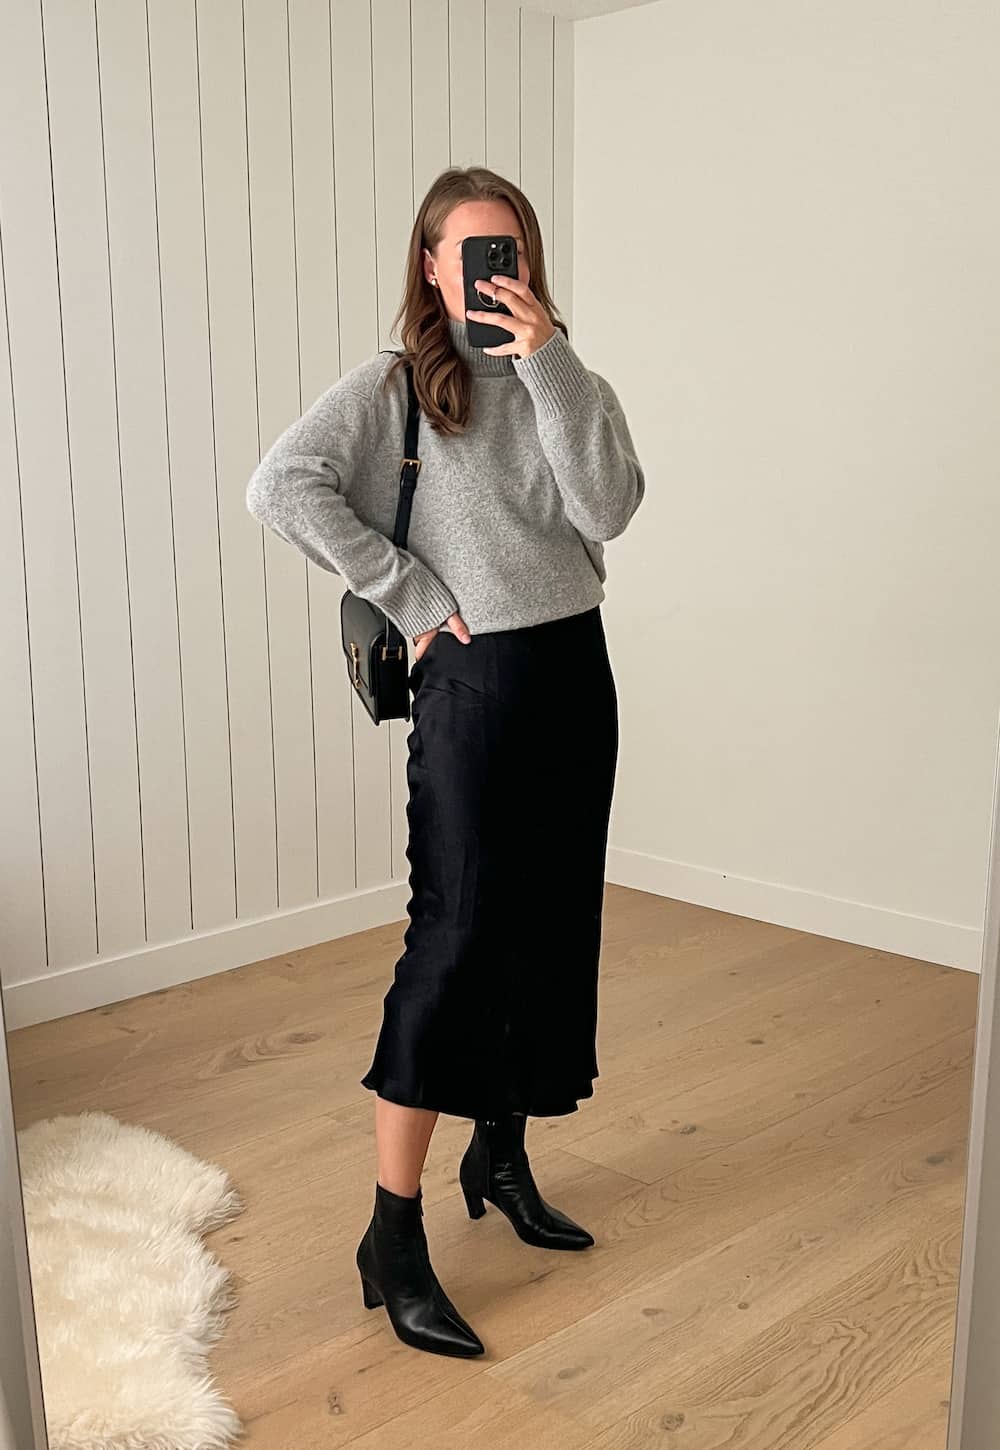 Christal wearing a black slip skirt with a grey sweater and black booties